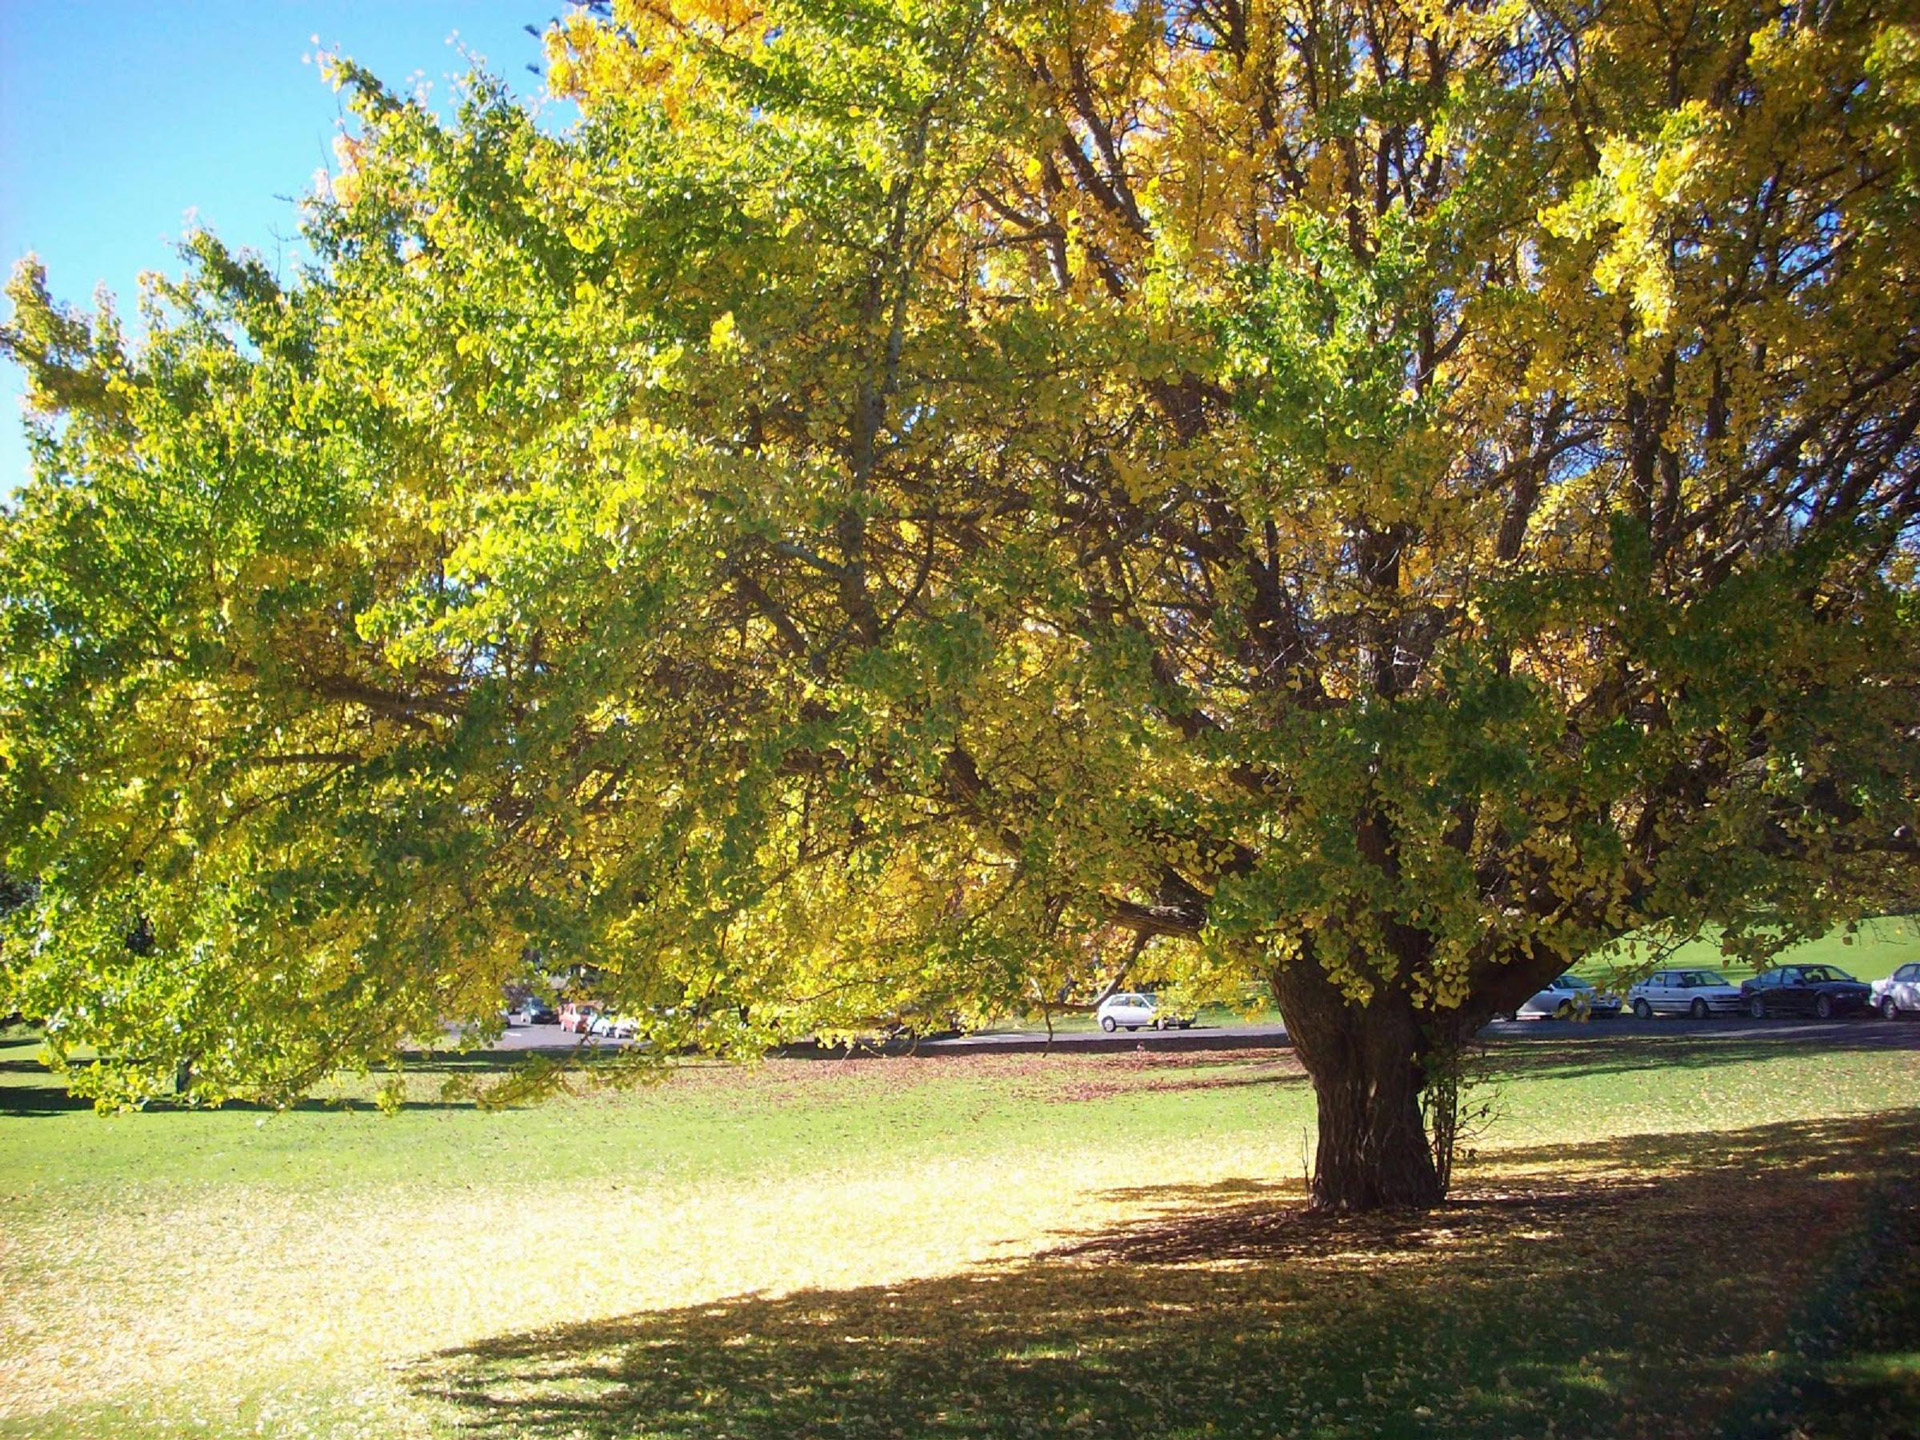 Big tree with autumn tonings offering shelter in the park